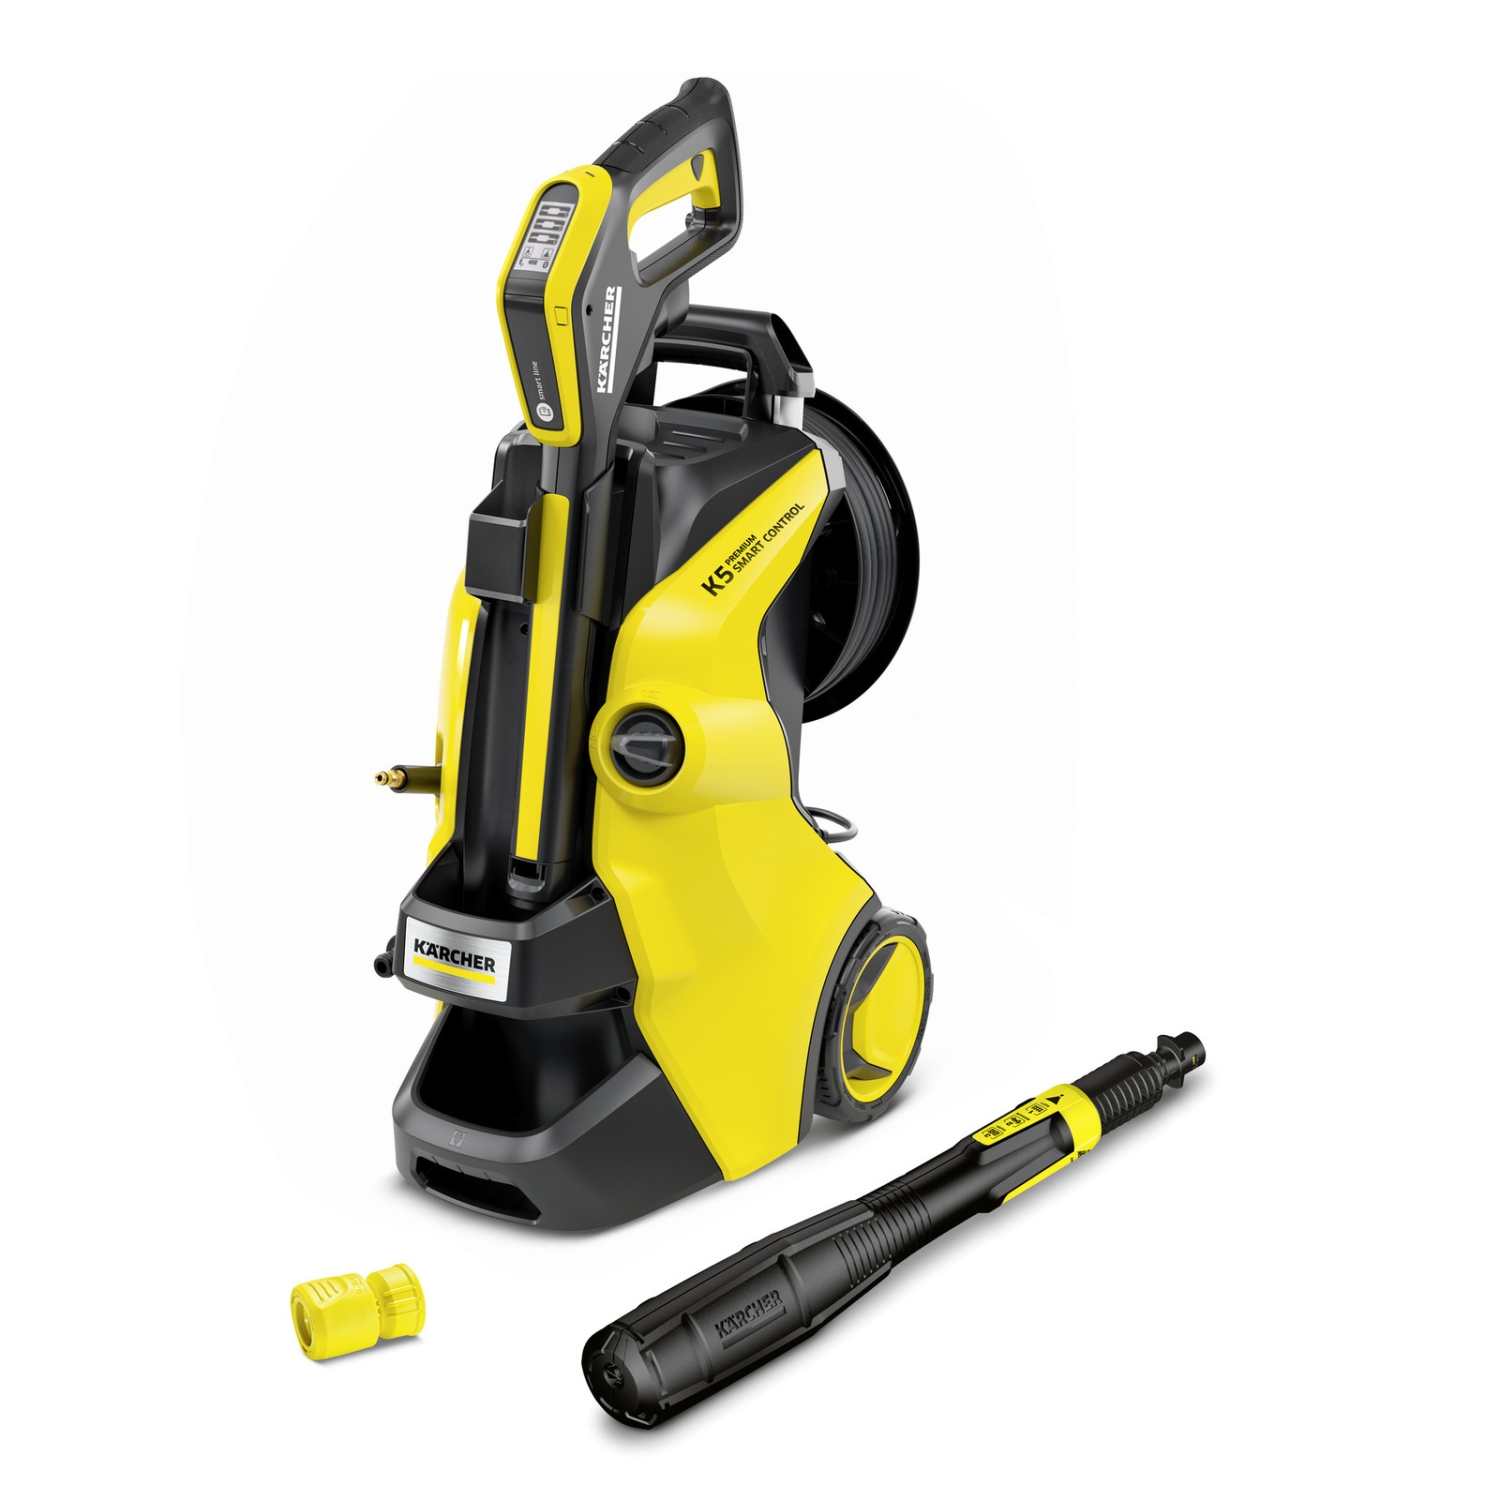 Karcher Electric Pressure Washer K 5 Premium Smart Control with 2000 PSI, Bluetooth, Karcher App Compatibility and Plug and Clean Detergent System